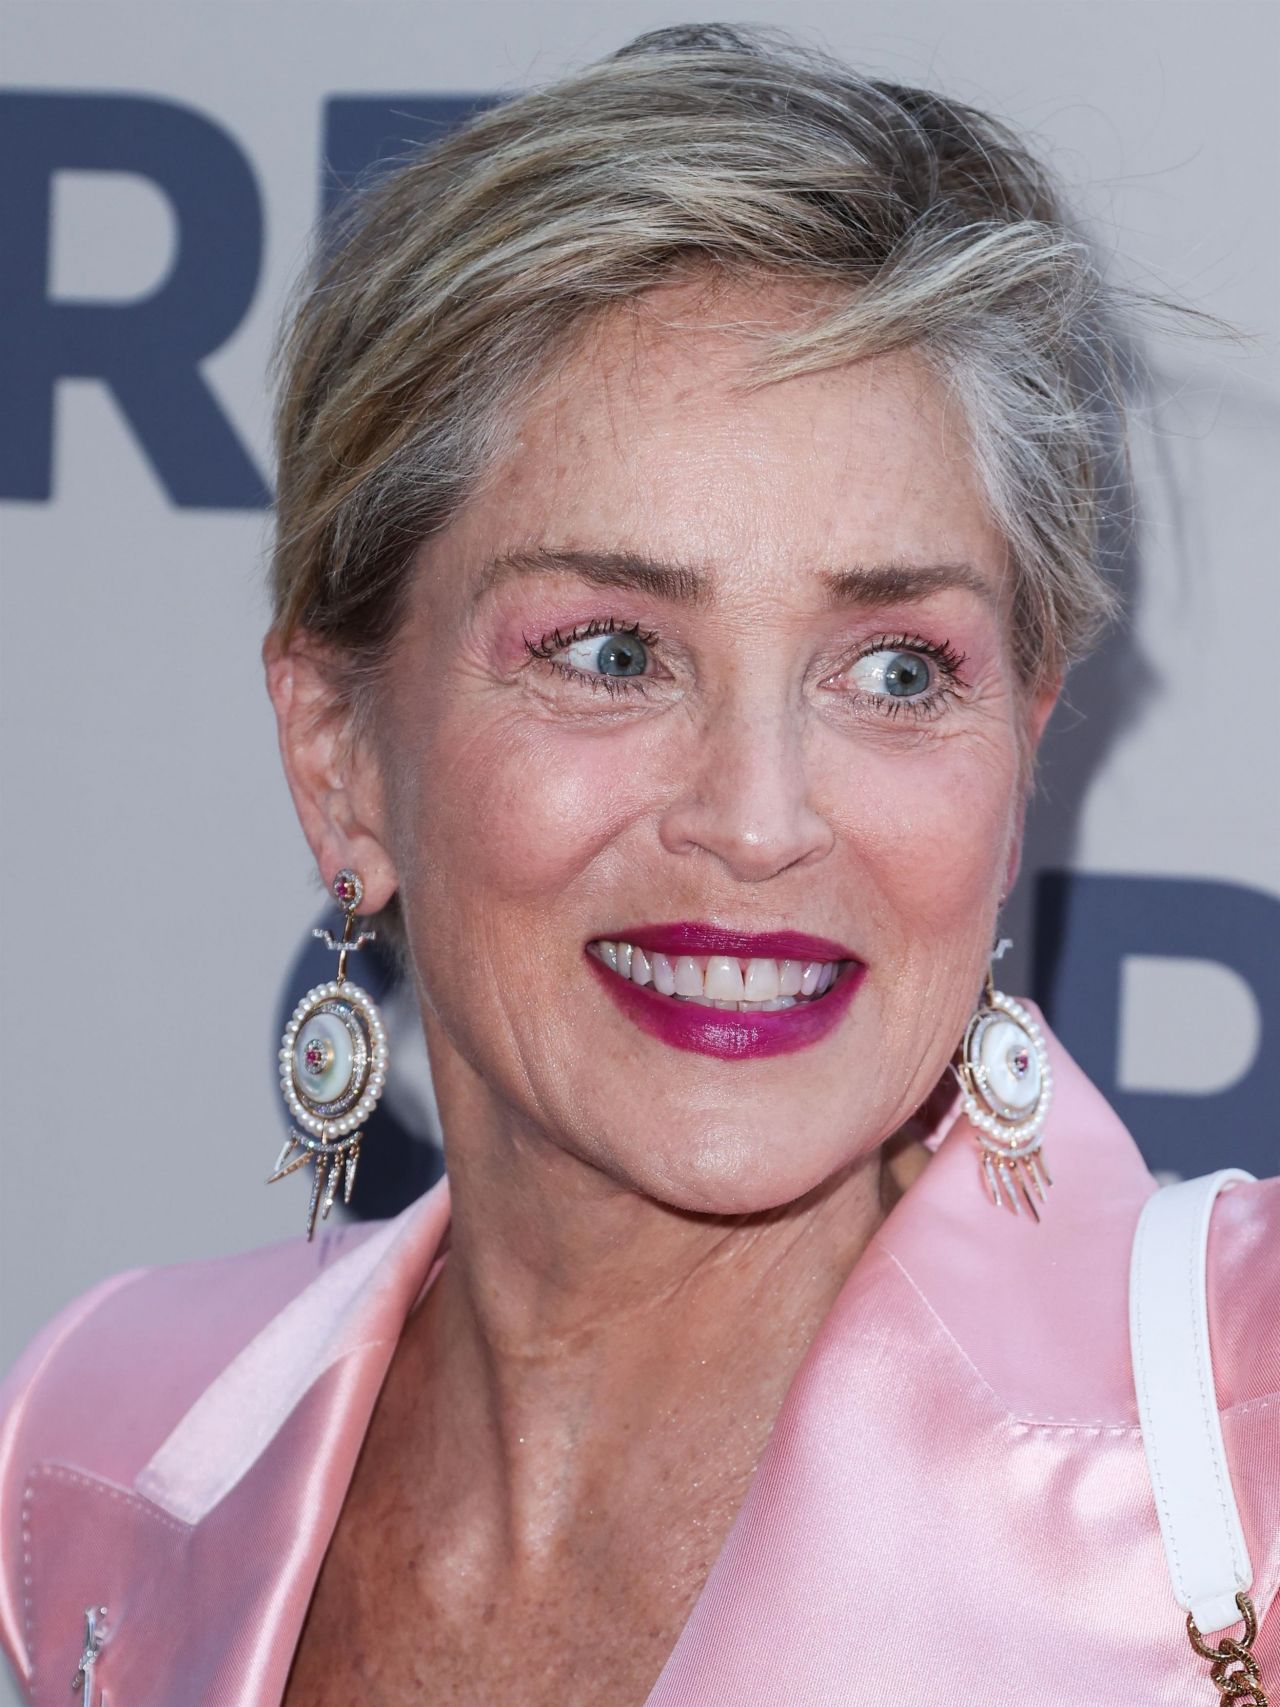 Sharon stone pictures 2022